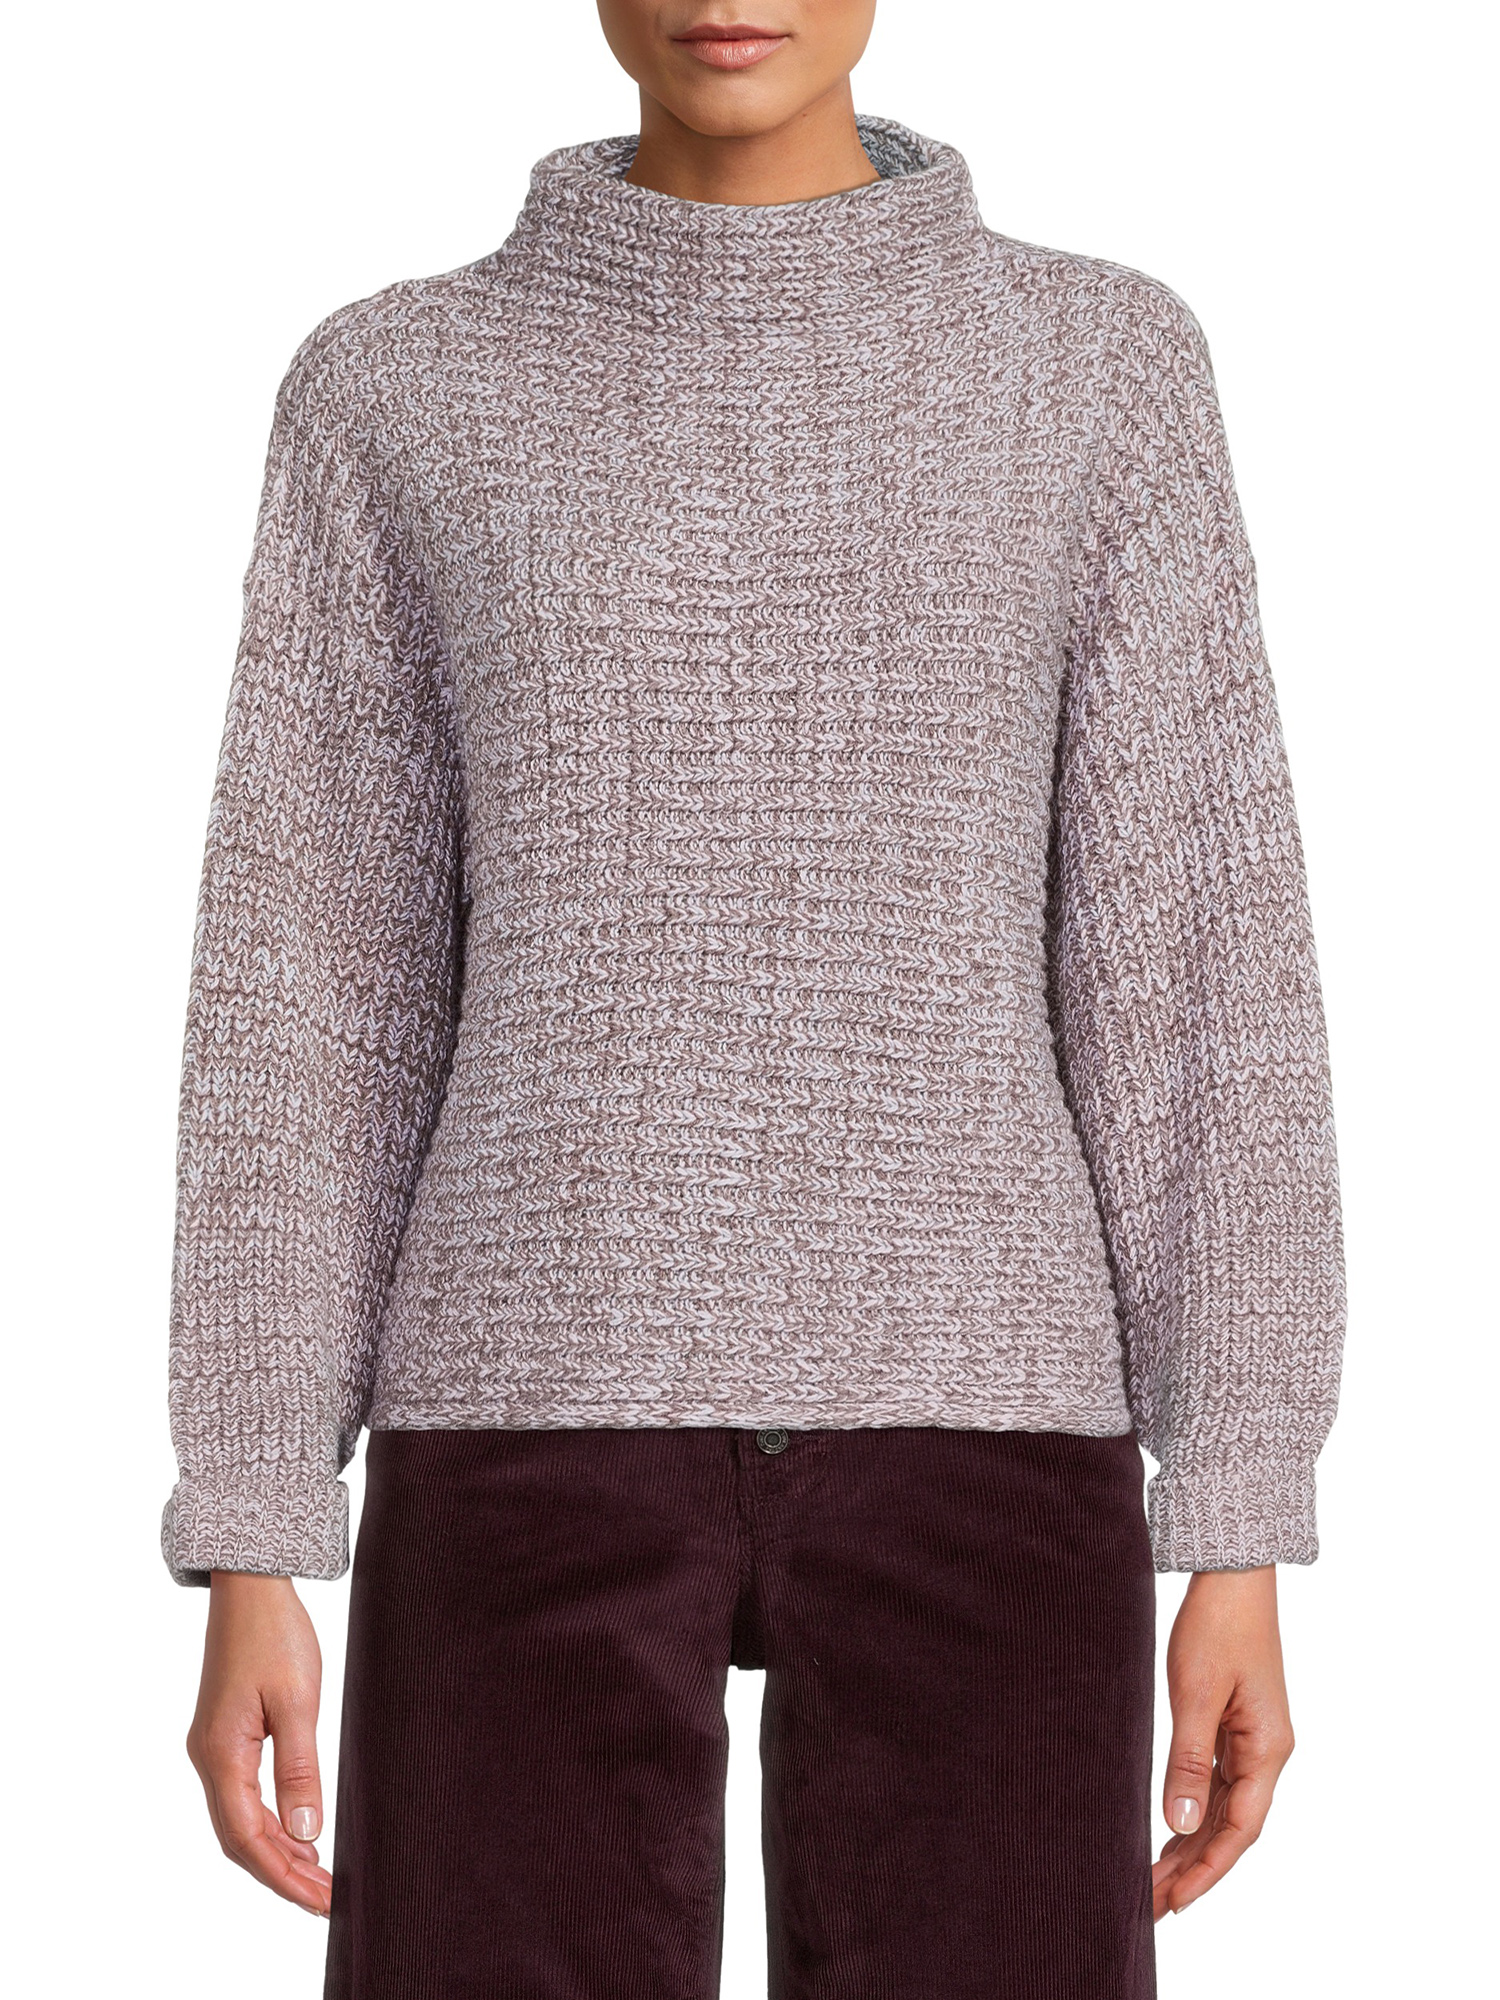 Time and Tru Women's Horizontal Shaker Knit Sweater - image 1 of 5